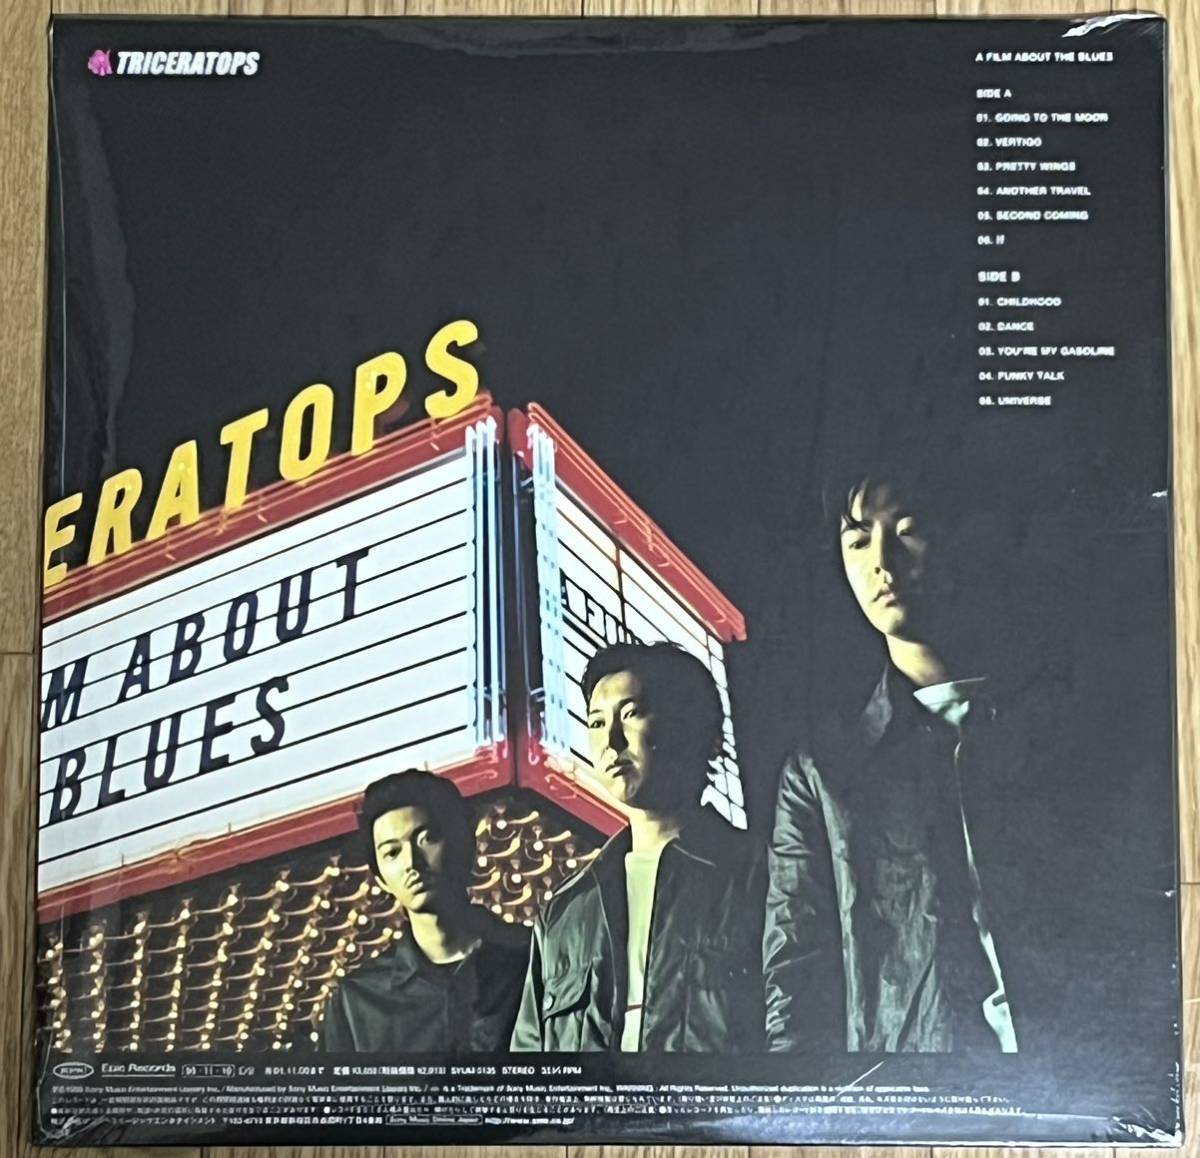 TRICERATOPS A FILM ABOUT THE BLUES レコード新品未開封品_画像2